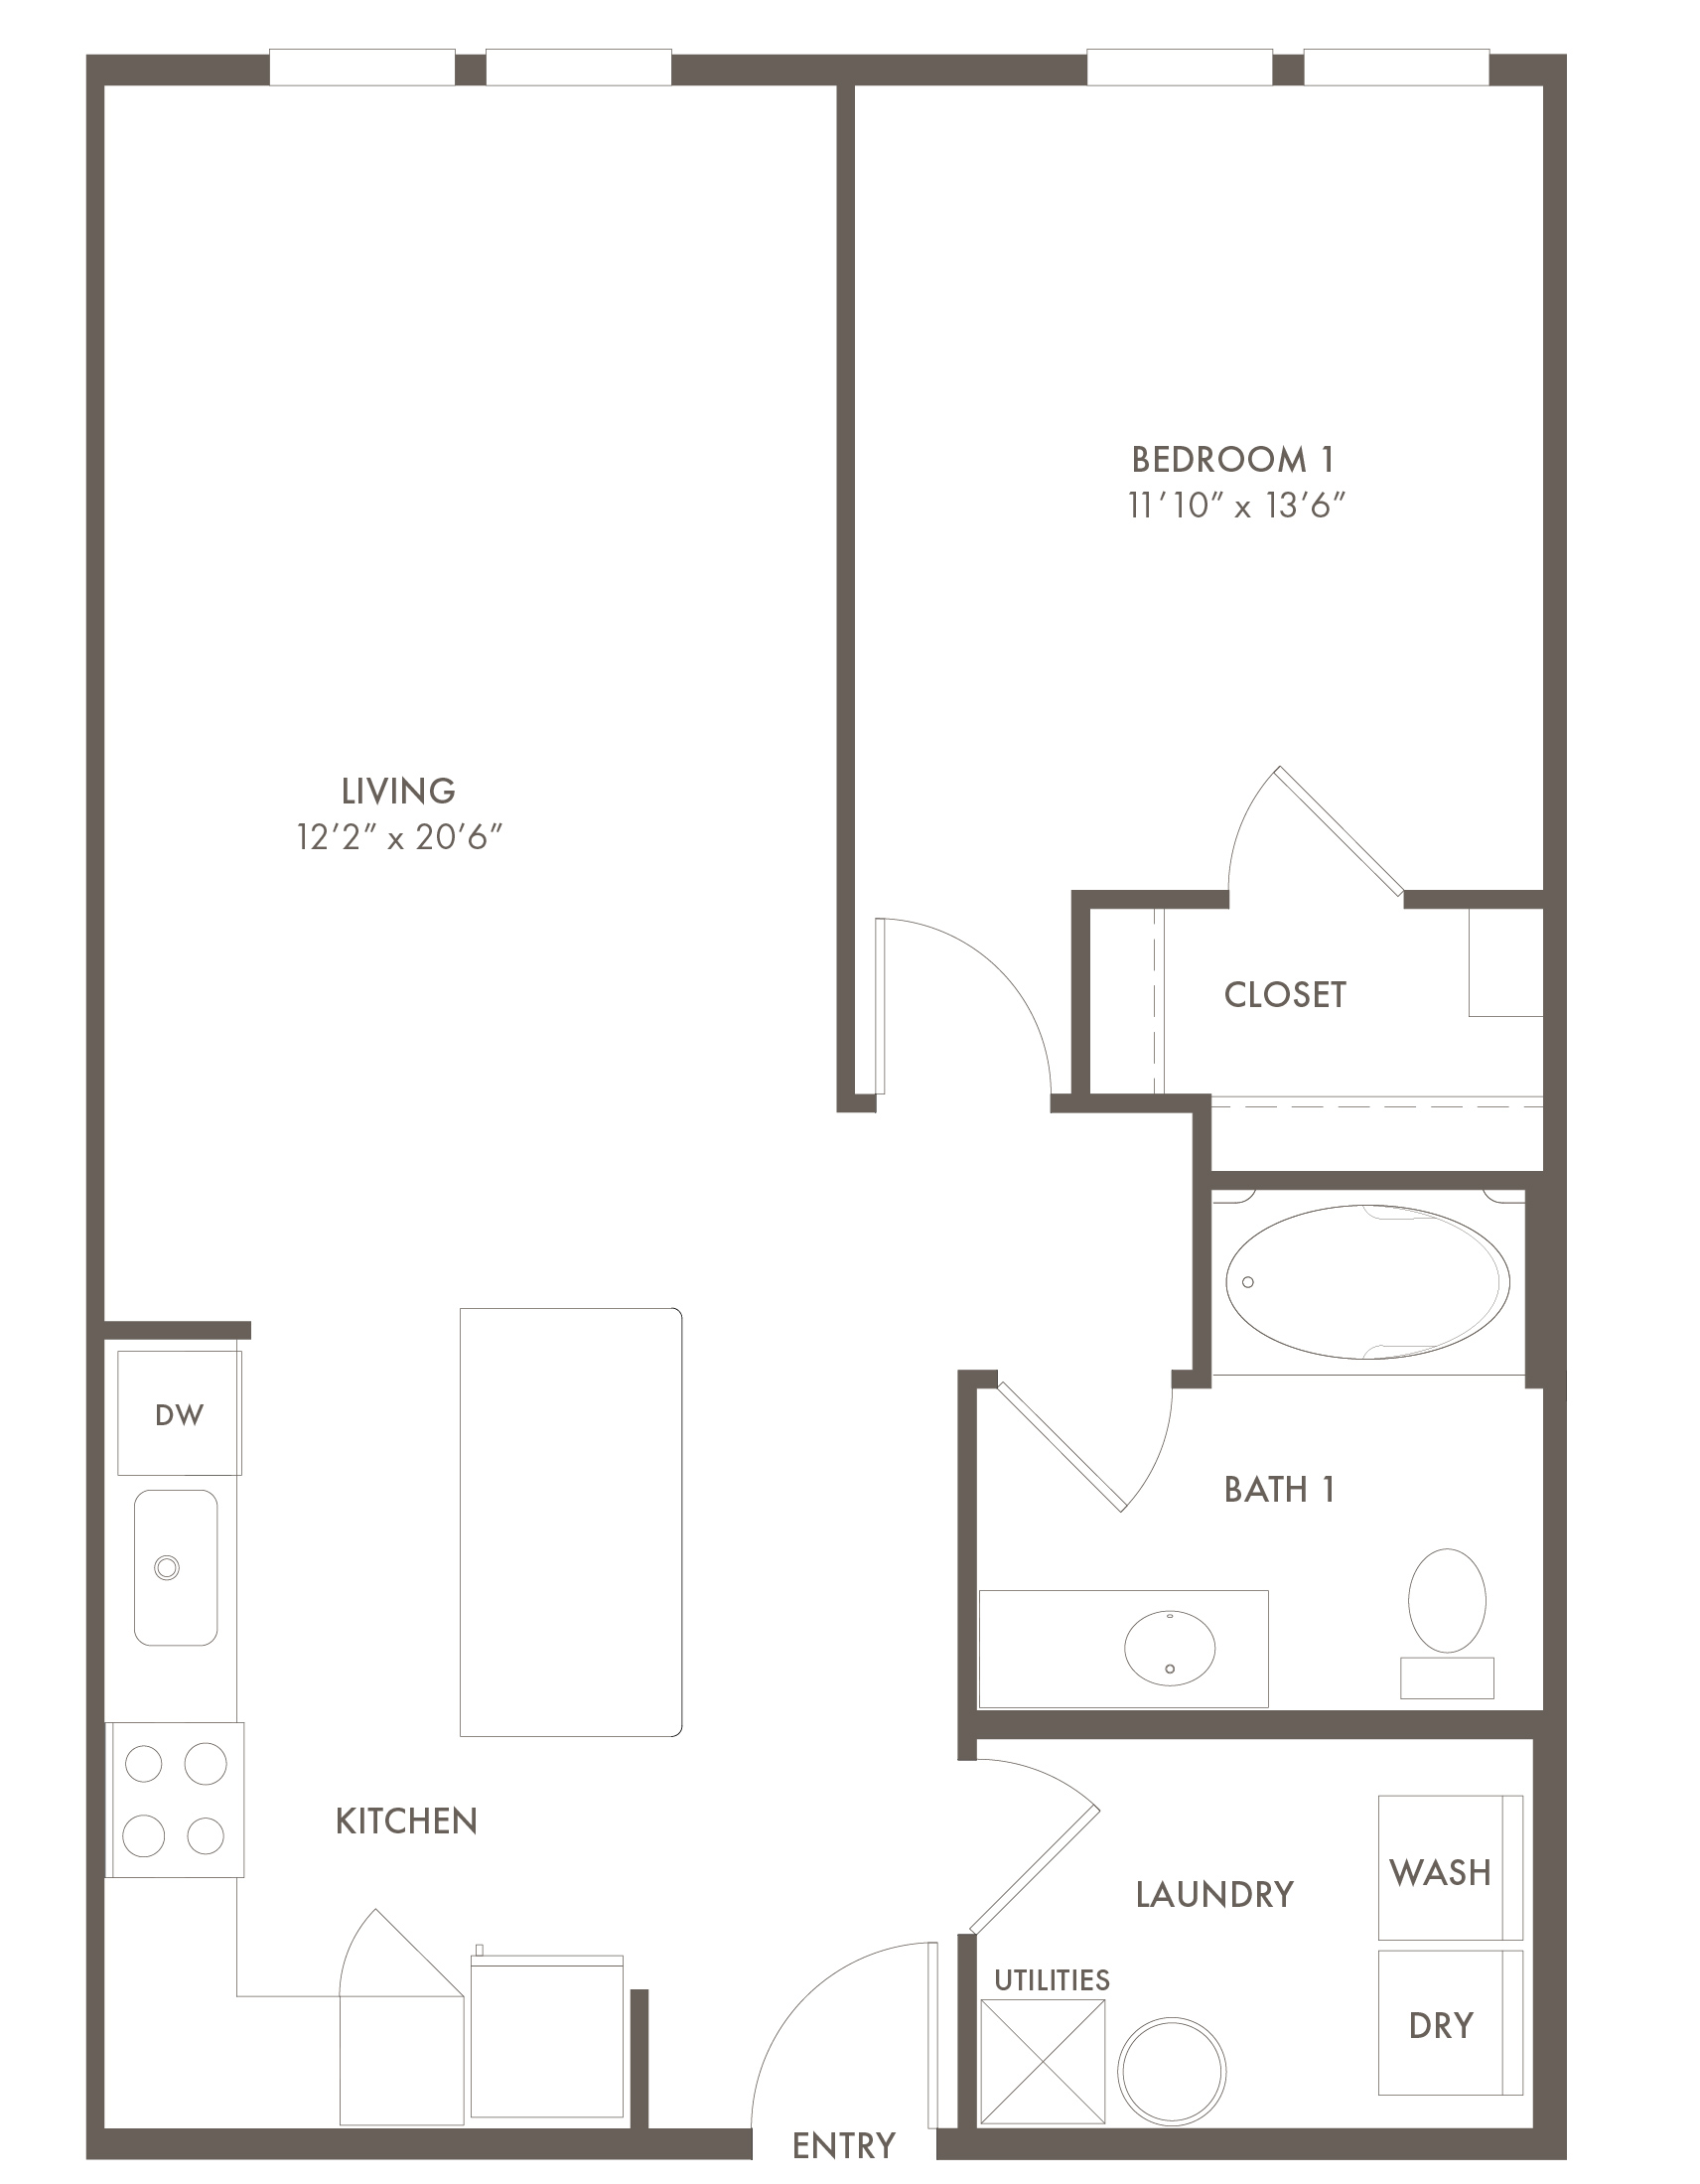 A A2 unit with 1 Bedrooms and 1 Bathrooms with area of 816 sq. ft